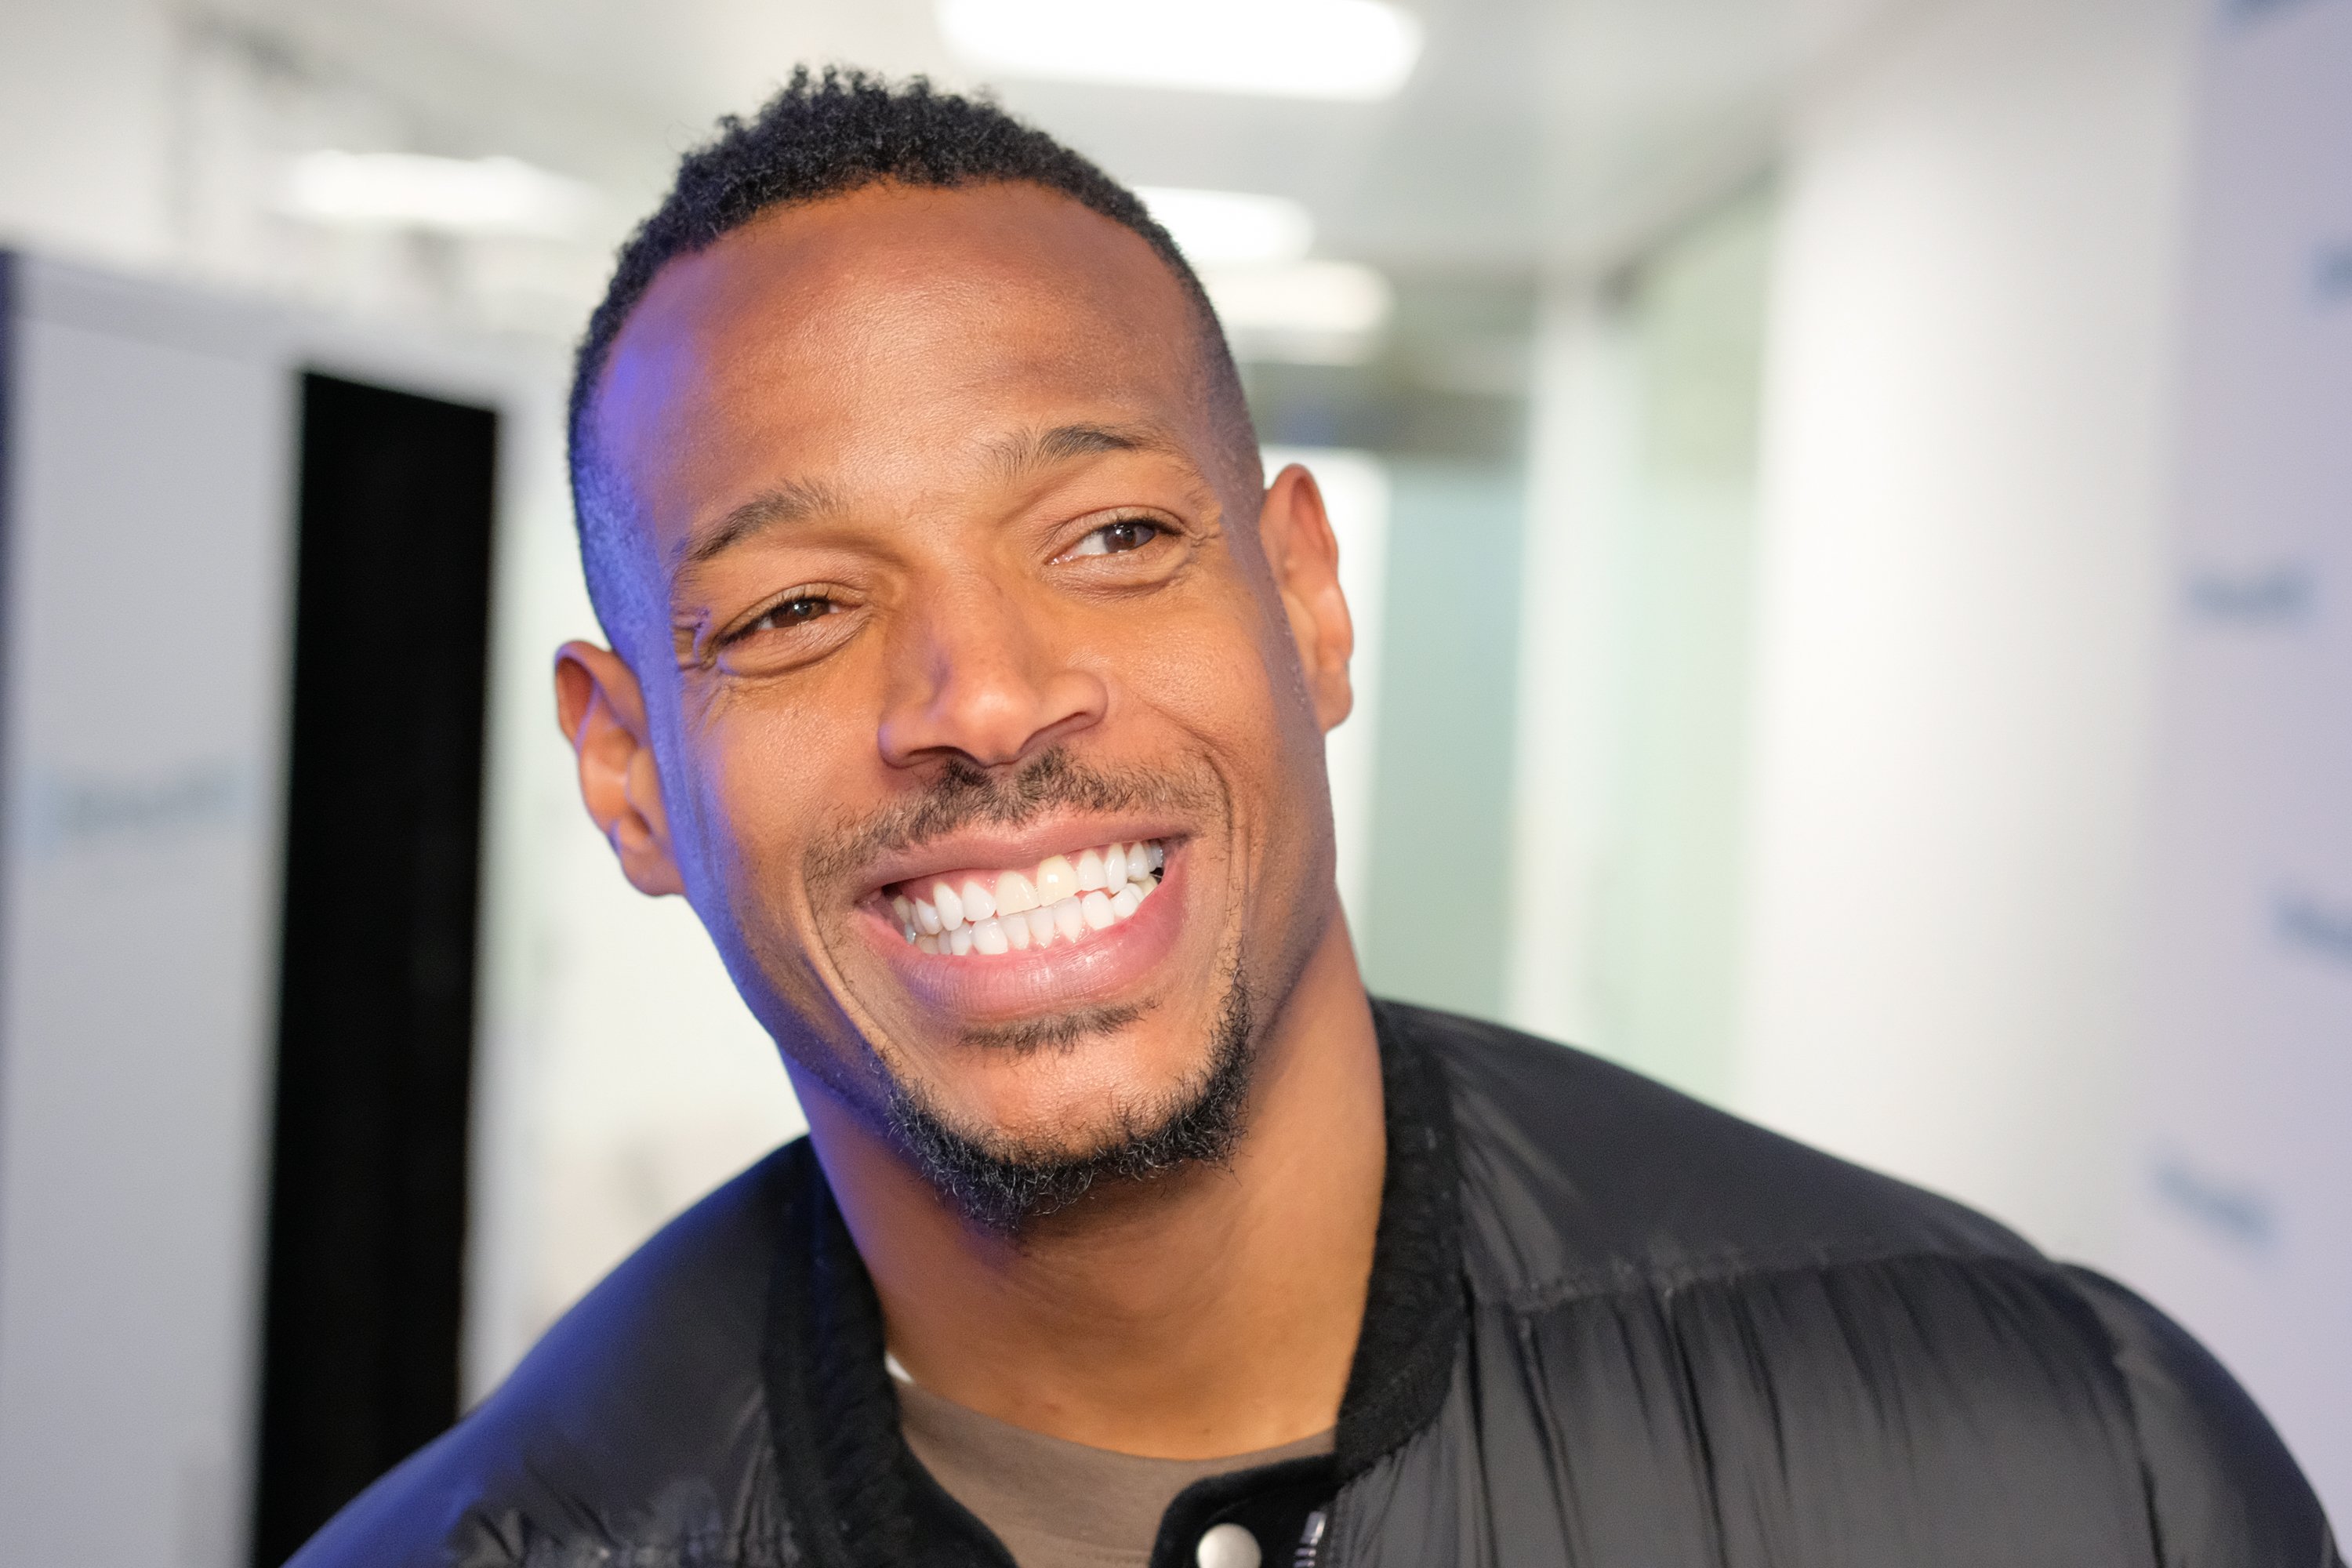 Marlon Wayans pictured at the SiriusXM Studios on March 2, 2018 in New York City. | Source: Getty Images